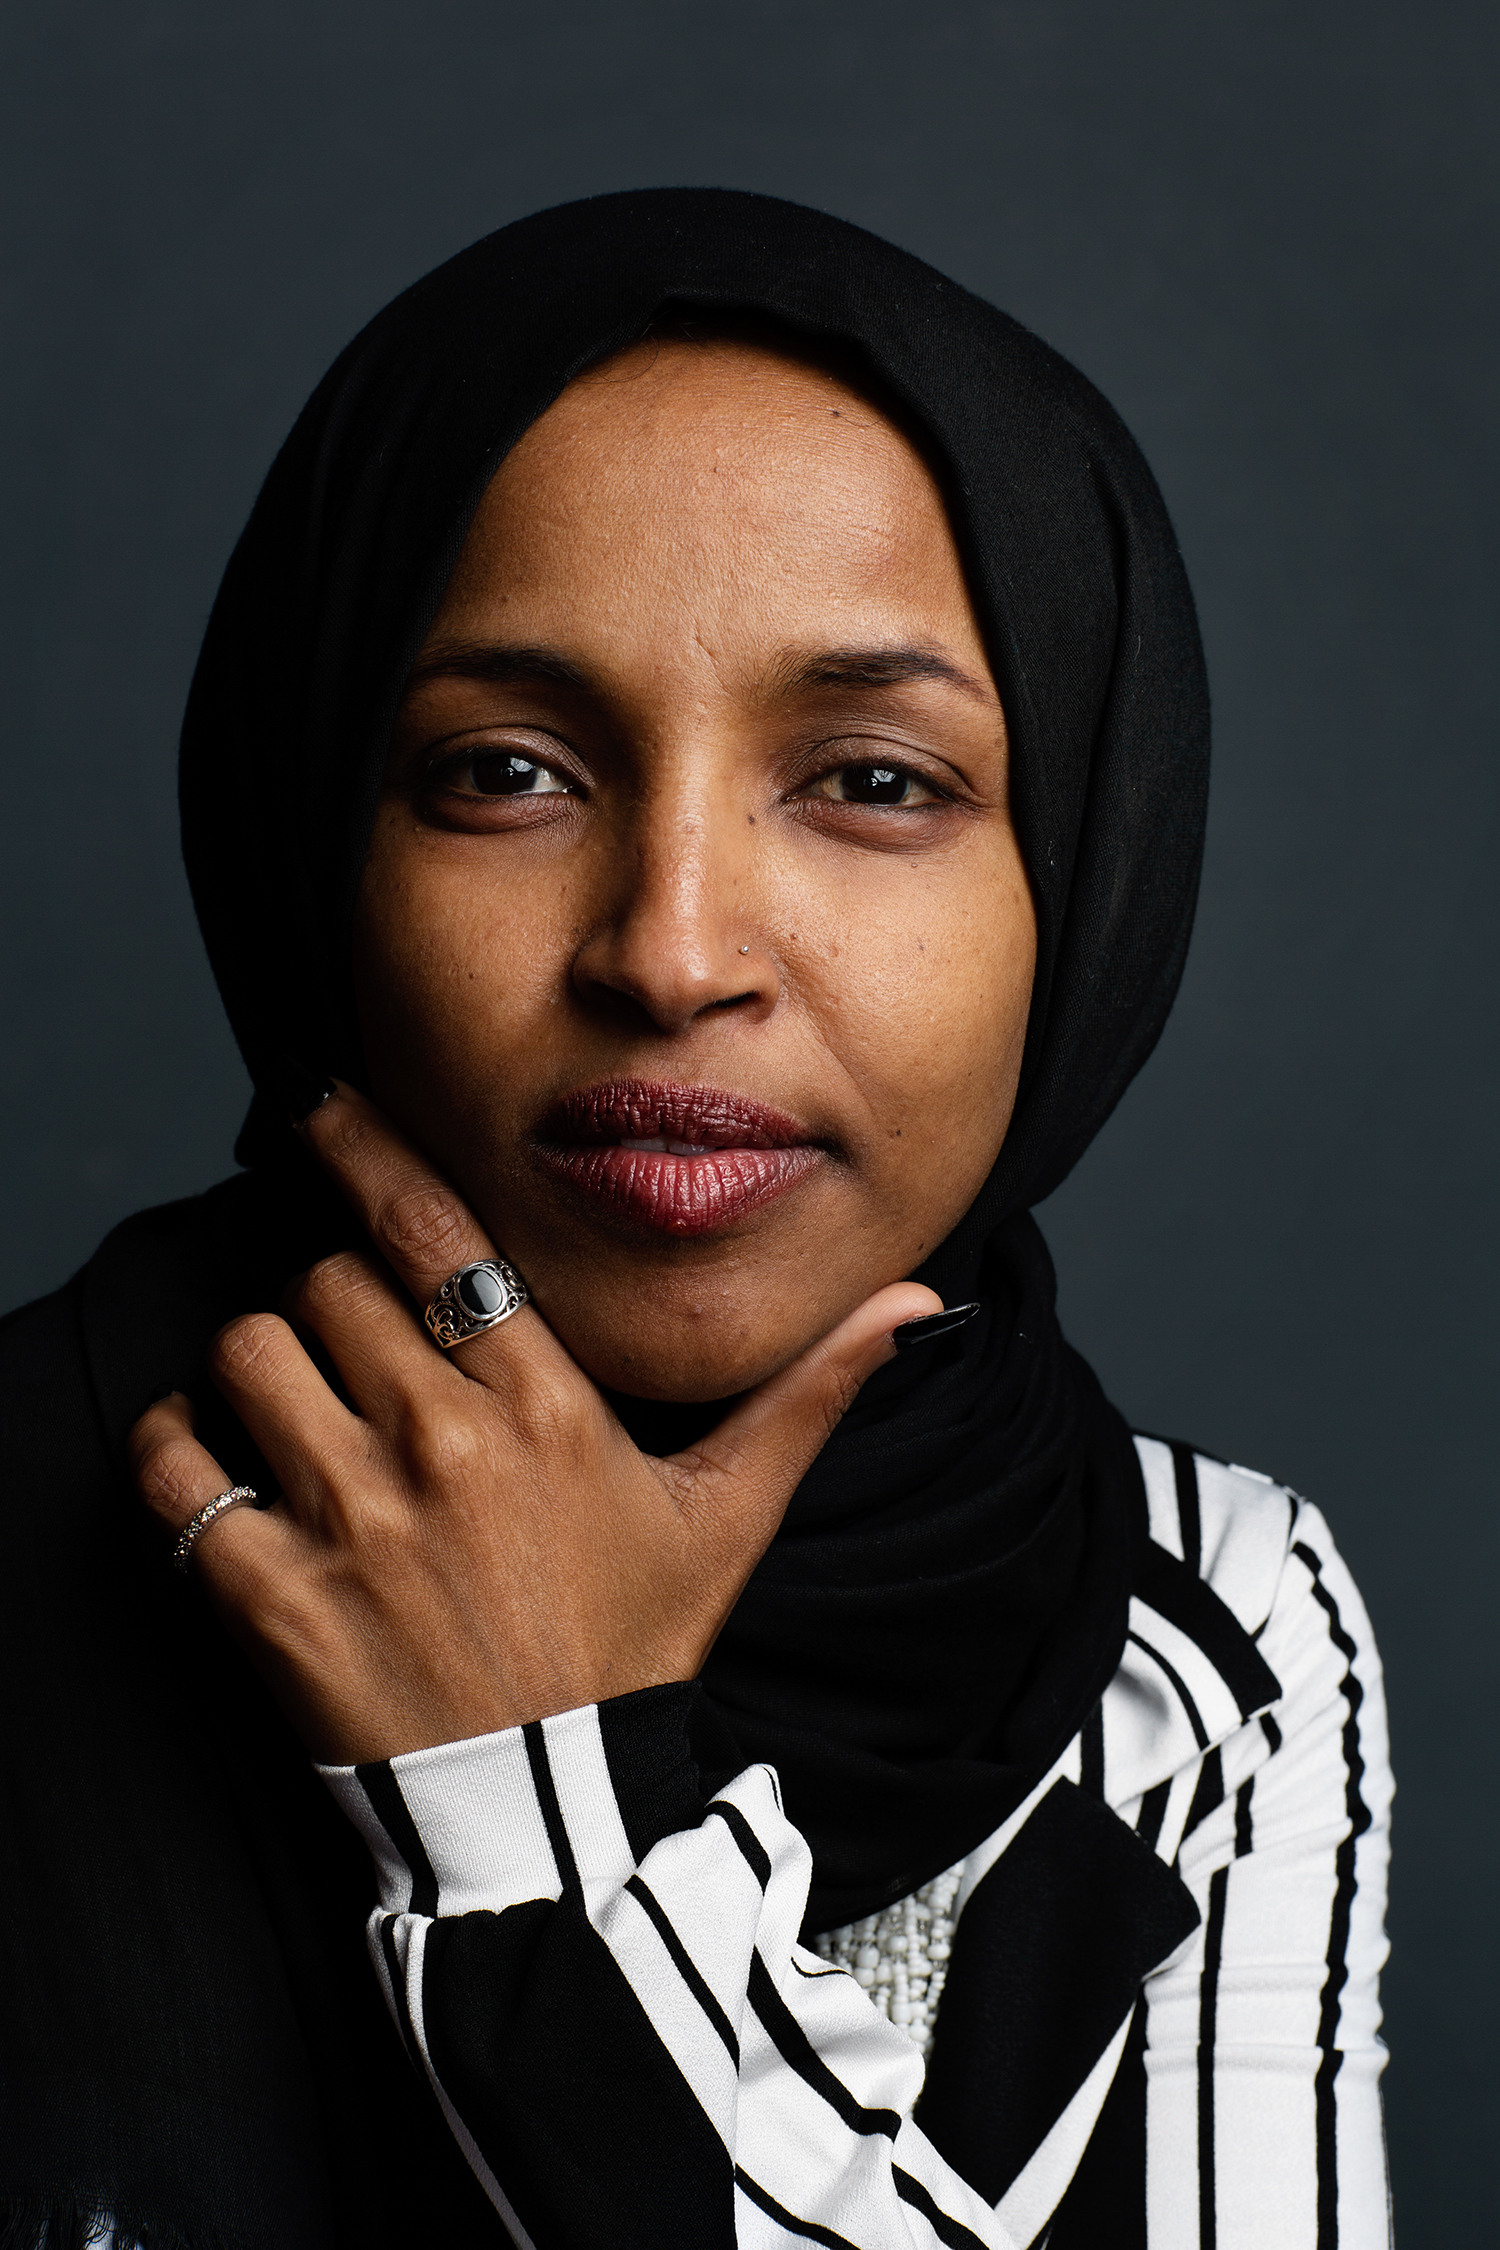  Ilhan Omar *****HOLD FOR WOMEN IN CONGRESS PROJECT****Ilhan Abdullahi Omar is a Somali American politician from Minnesota. In 2016, she was elected to the Minnesota House of Representatives as a member of the Democratic–Farmer–Labor Party, making he